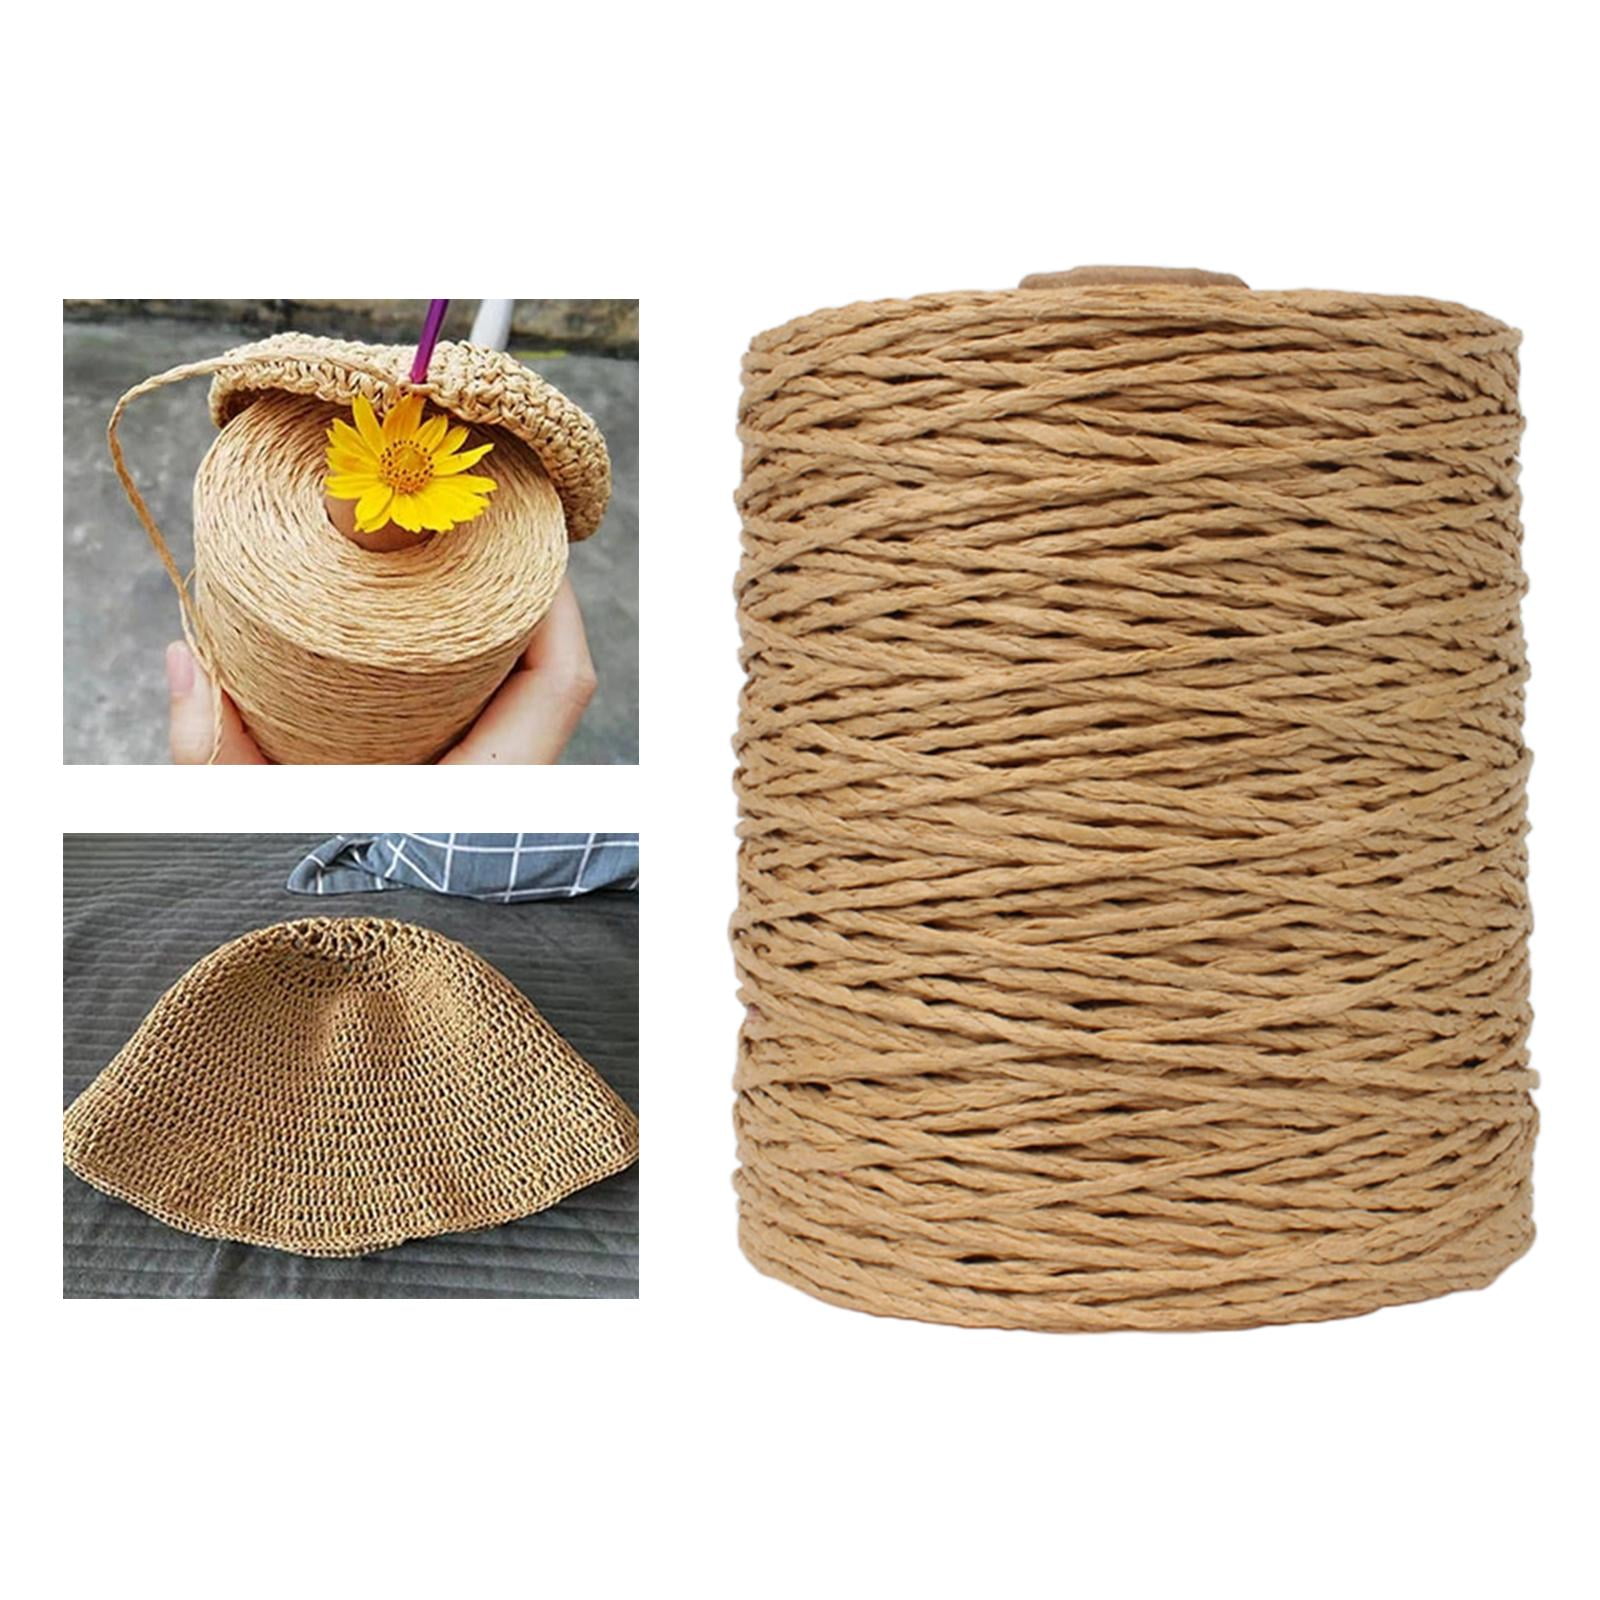 Raffia Ribbon Natural Twine Cord for Gift Wrapping Crafting Weaving Beige, Adult Unisex, Size: As described